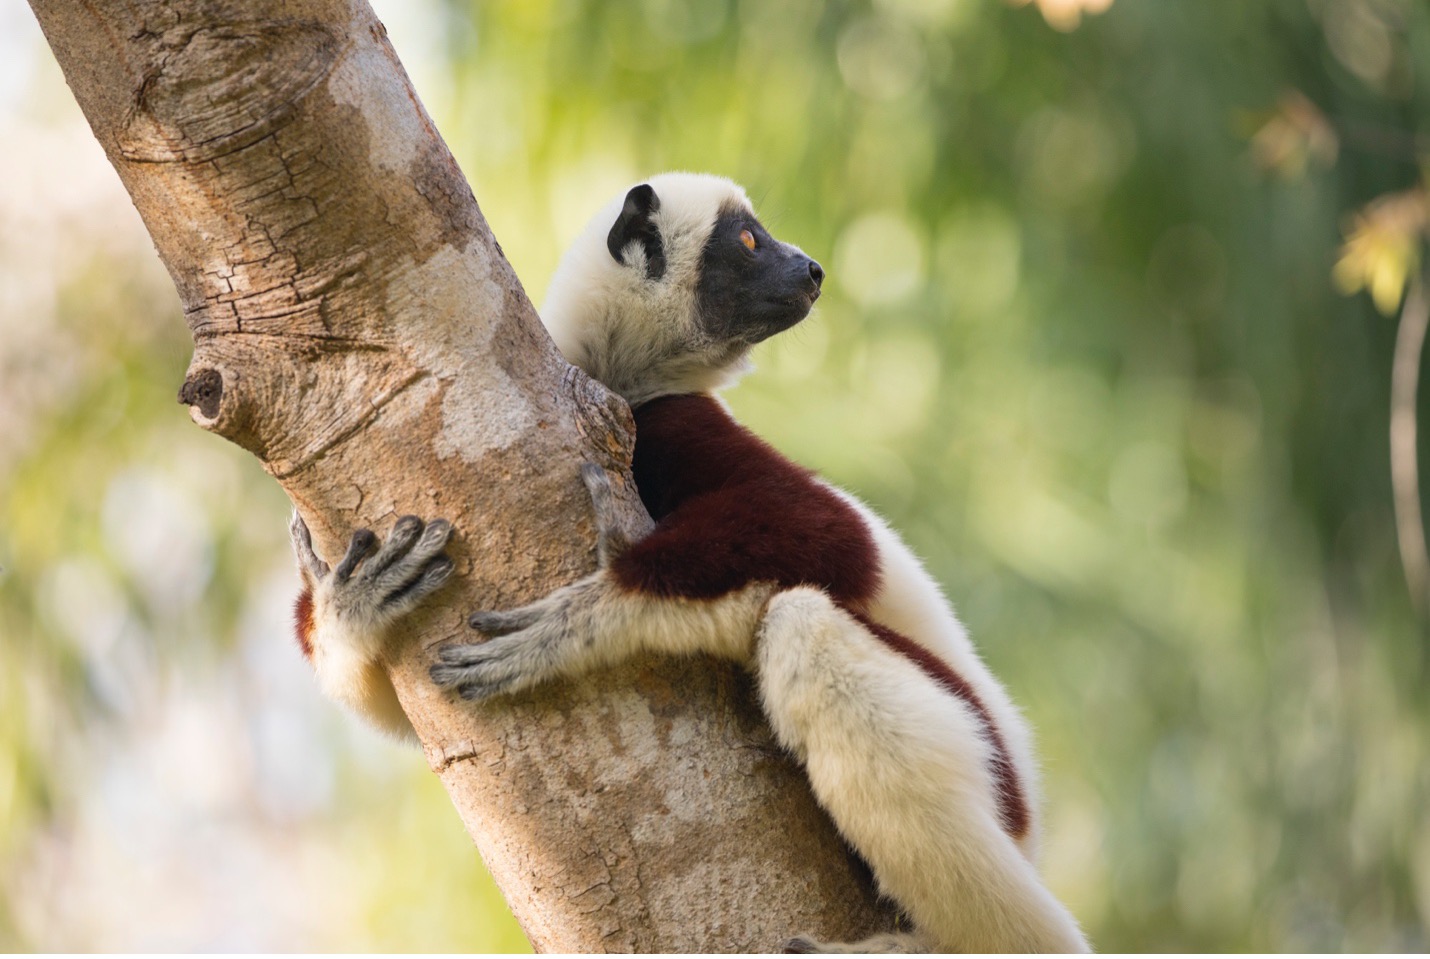 a sifaka lemur is entirely in focus with a gently blurred background